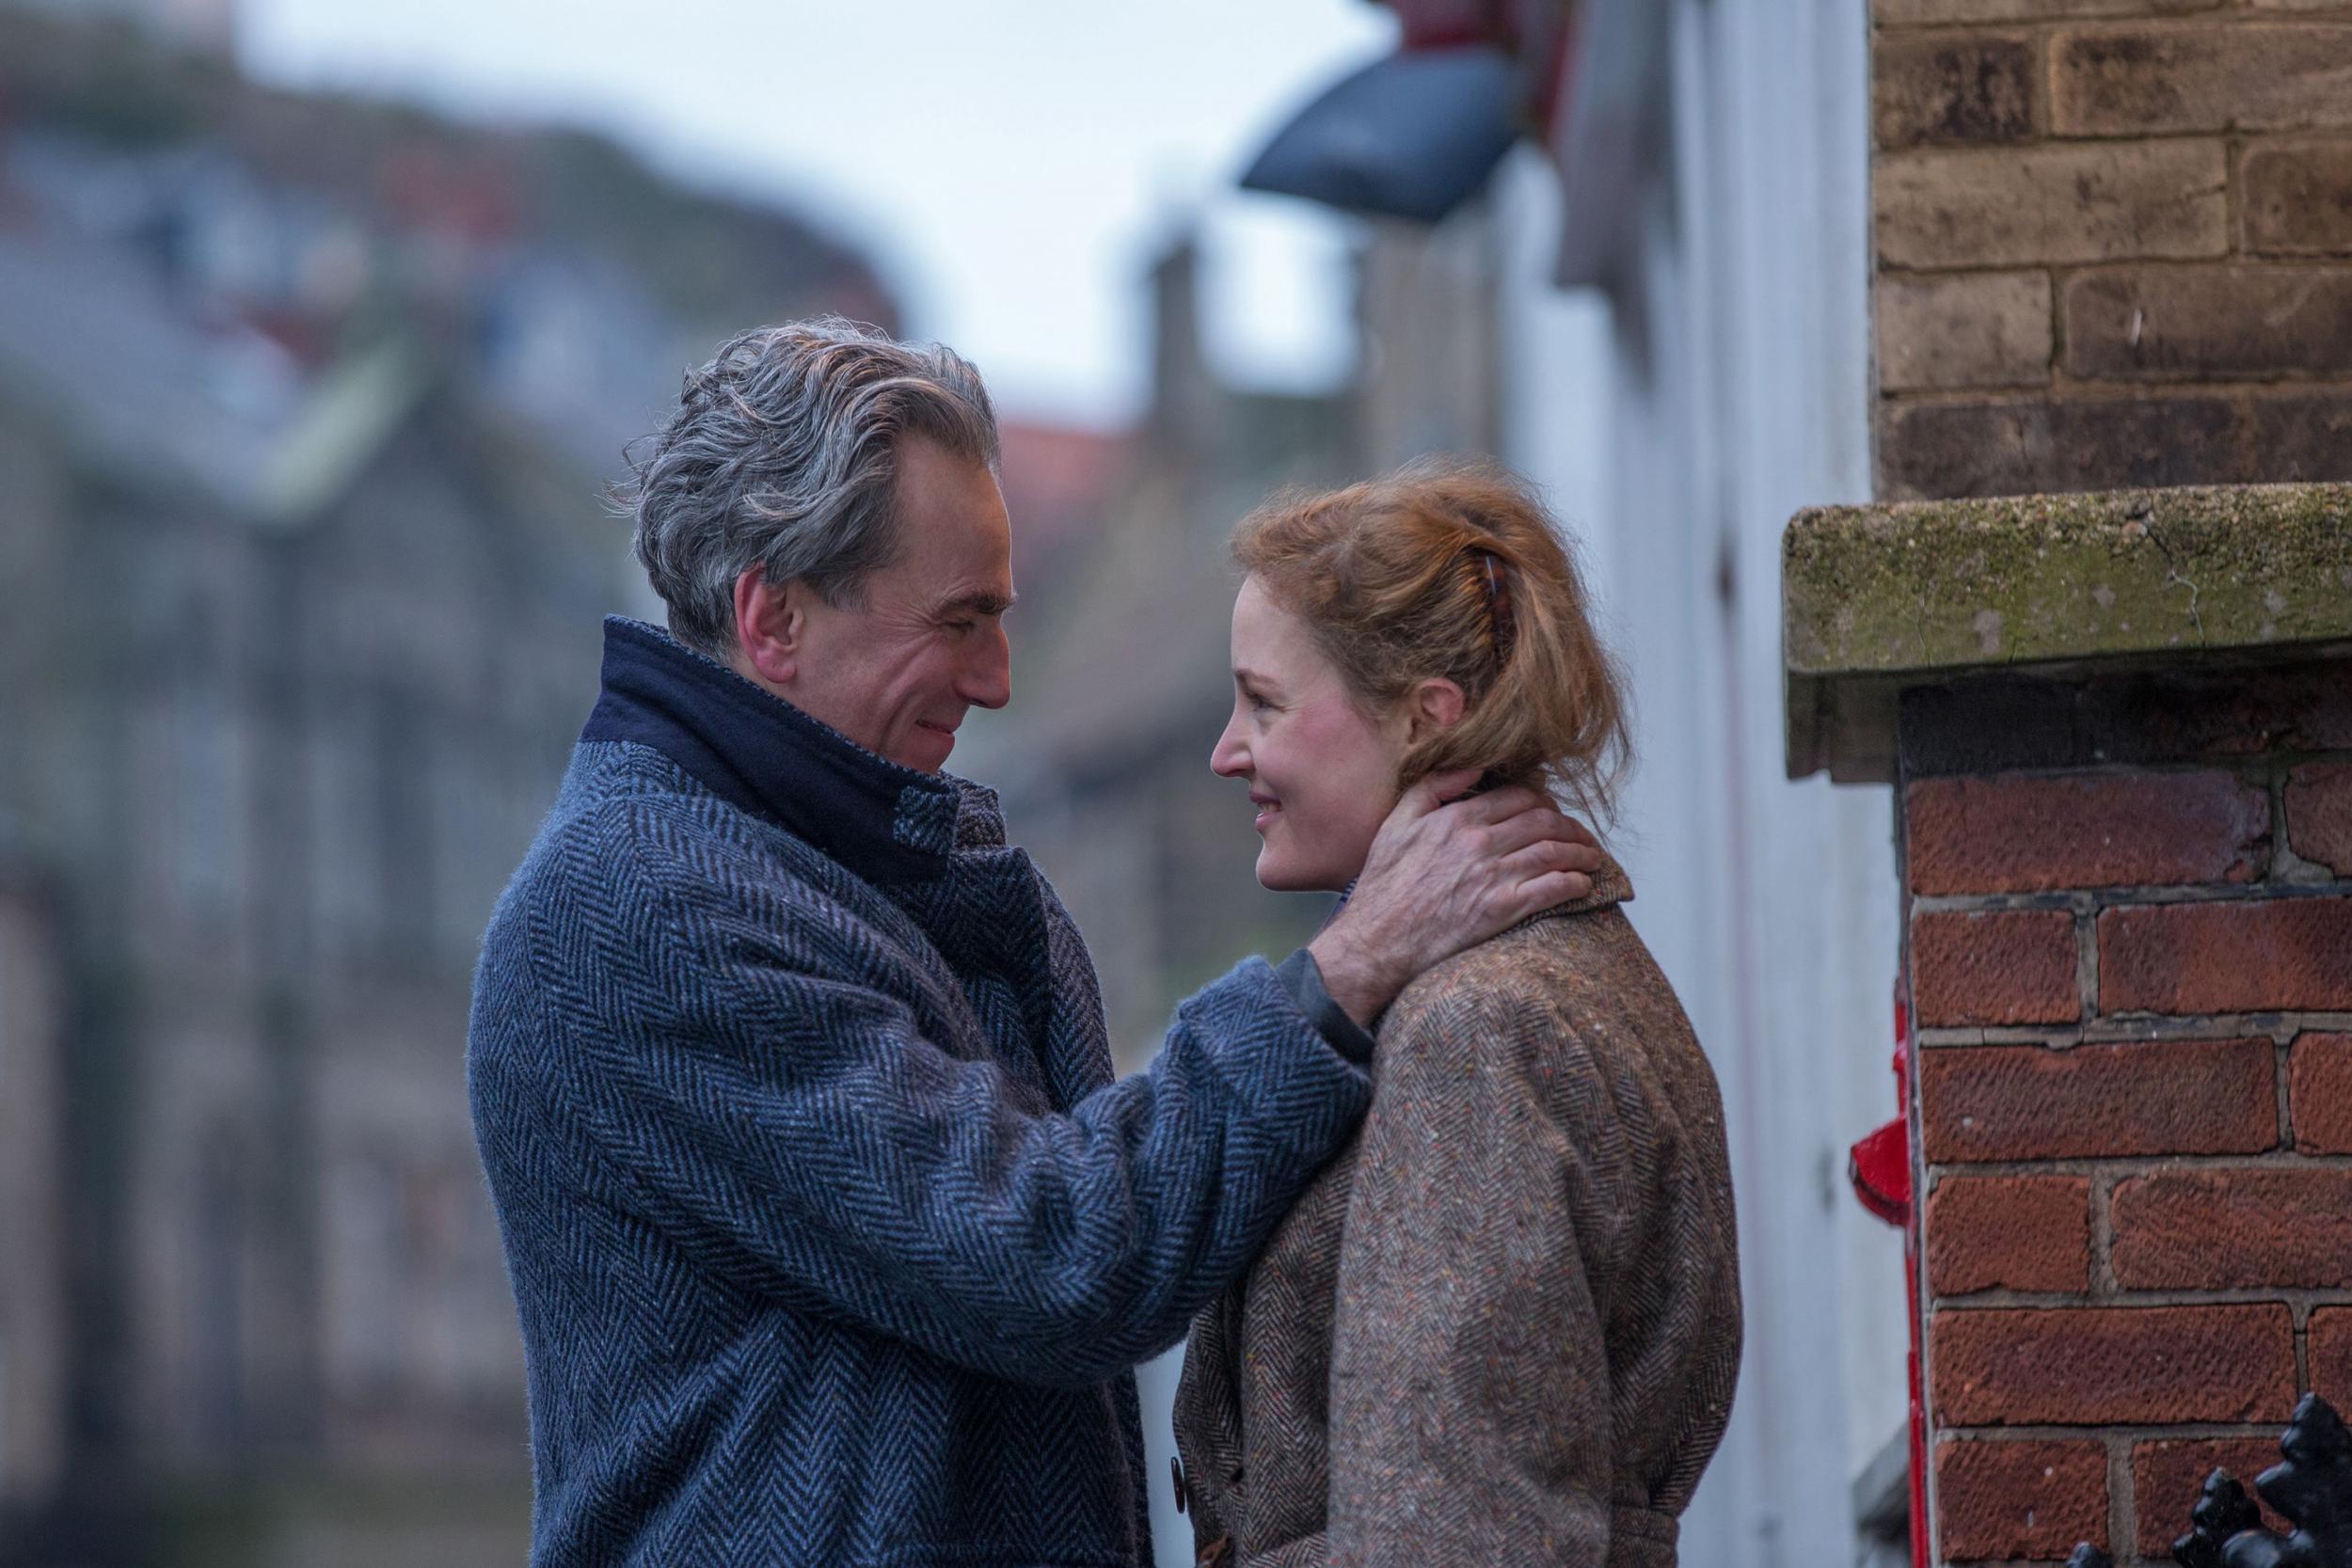 Reynolds Woodcock (Daniel Day-Lewis) and Alma (Vicky Krieps) in Paul Thomas Anderson's latest